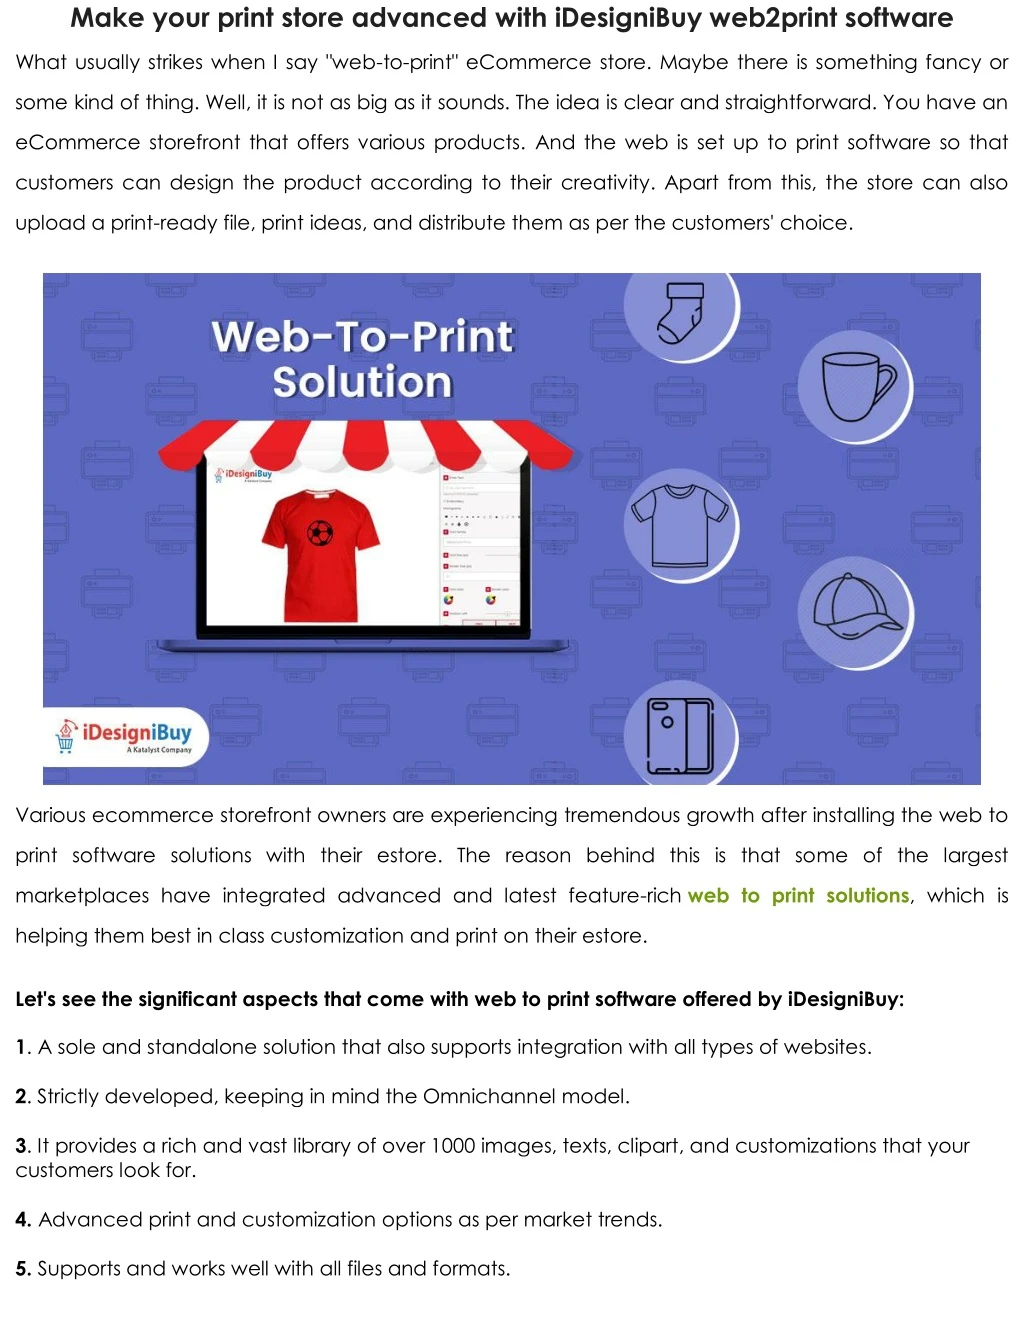 make your print store advanced with idesignibuy